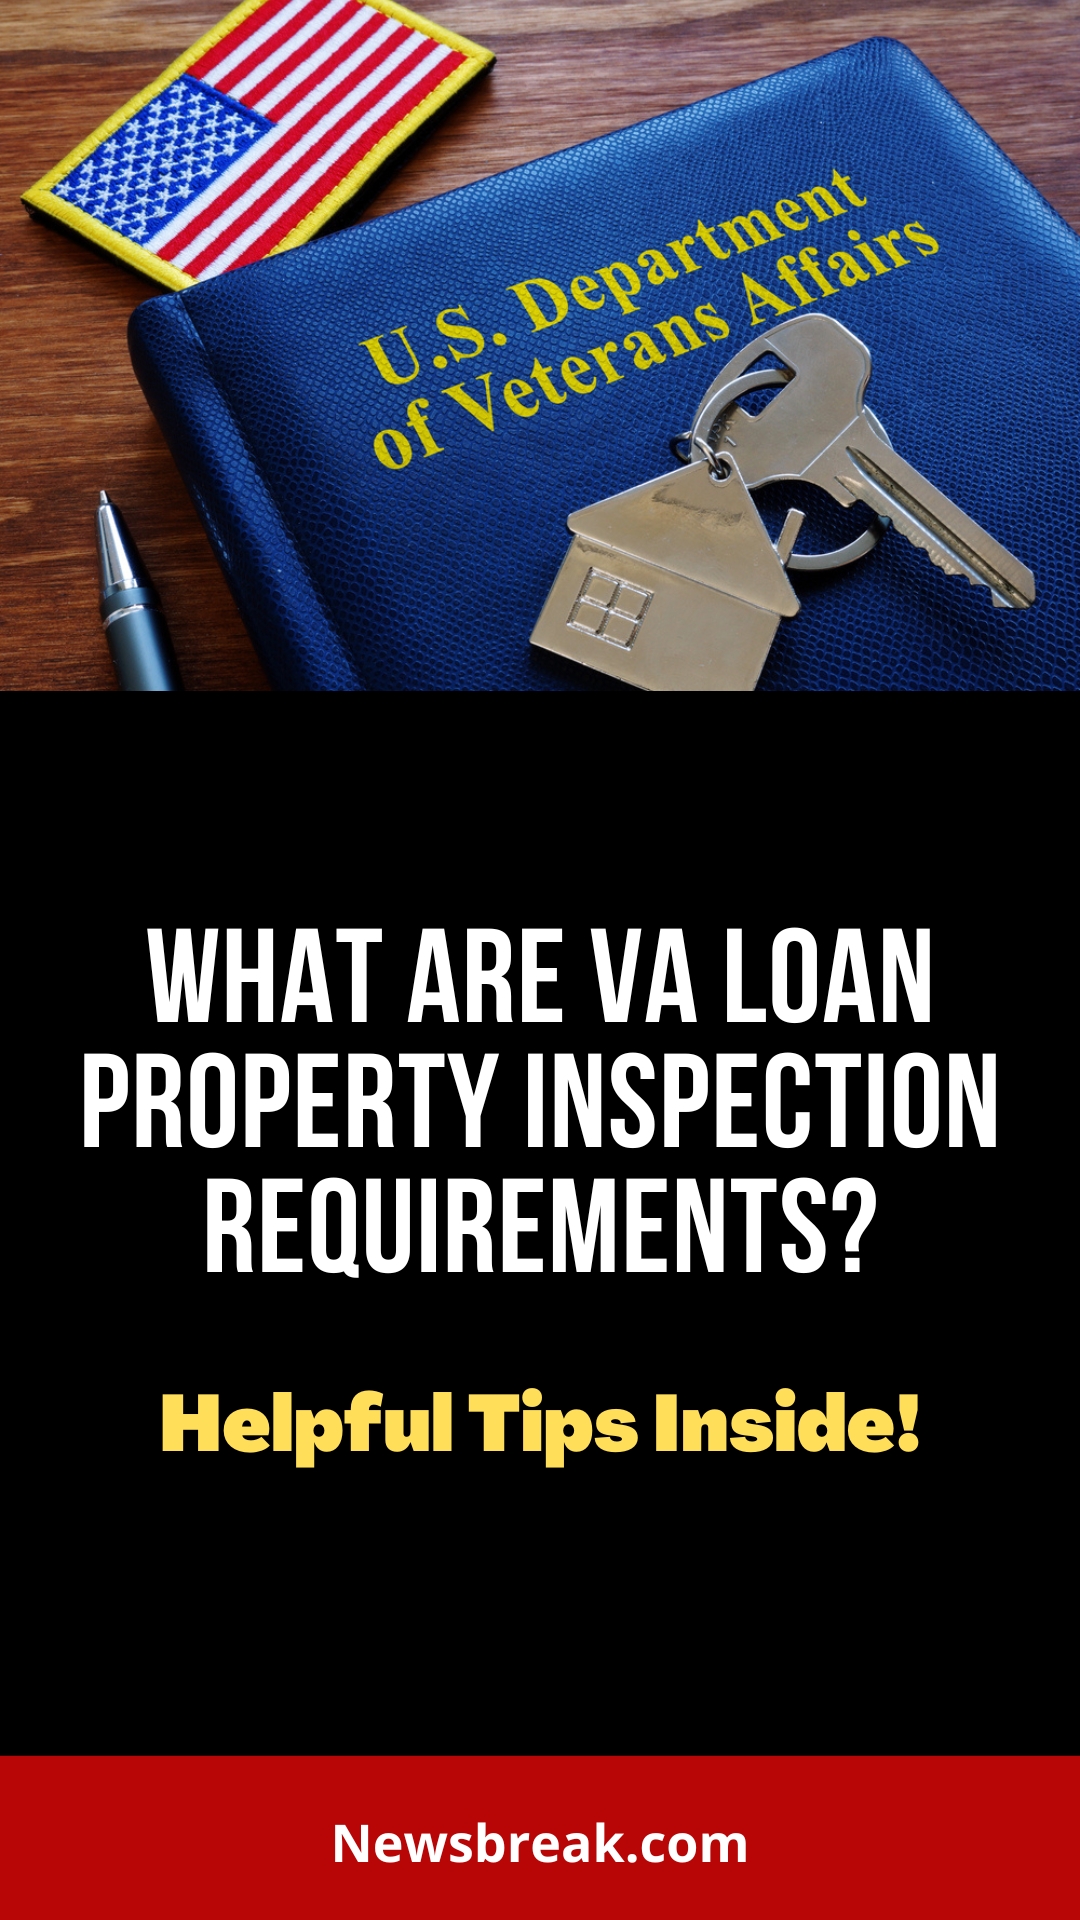 What Are The Minimum Property Condition Requirements For VA Loans